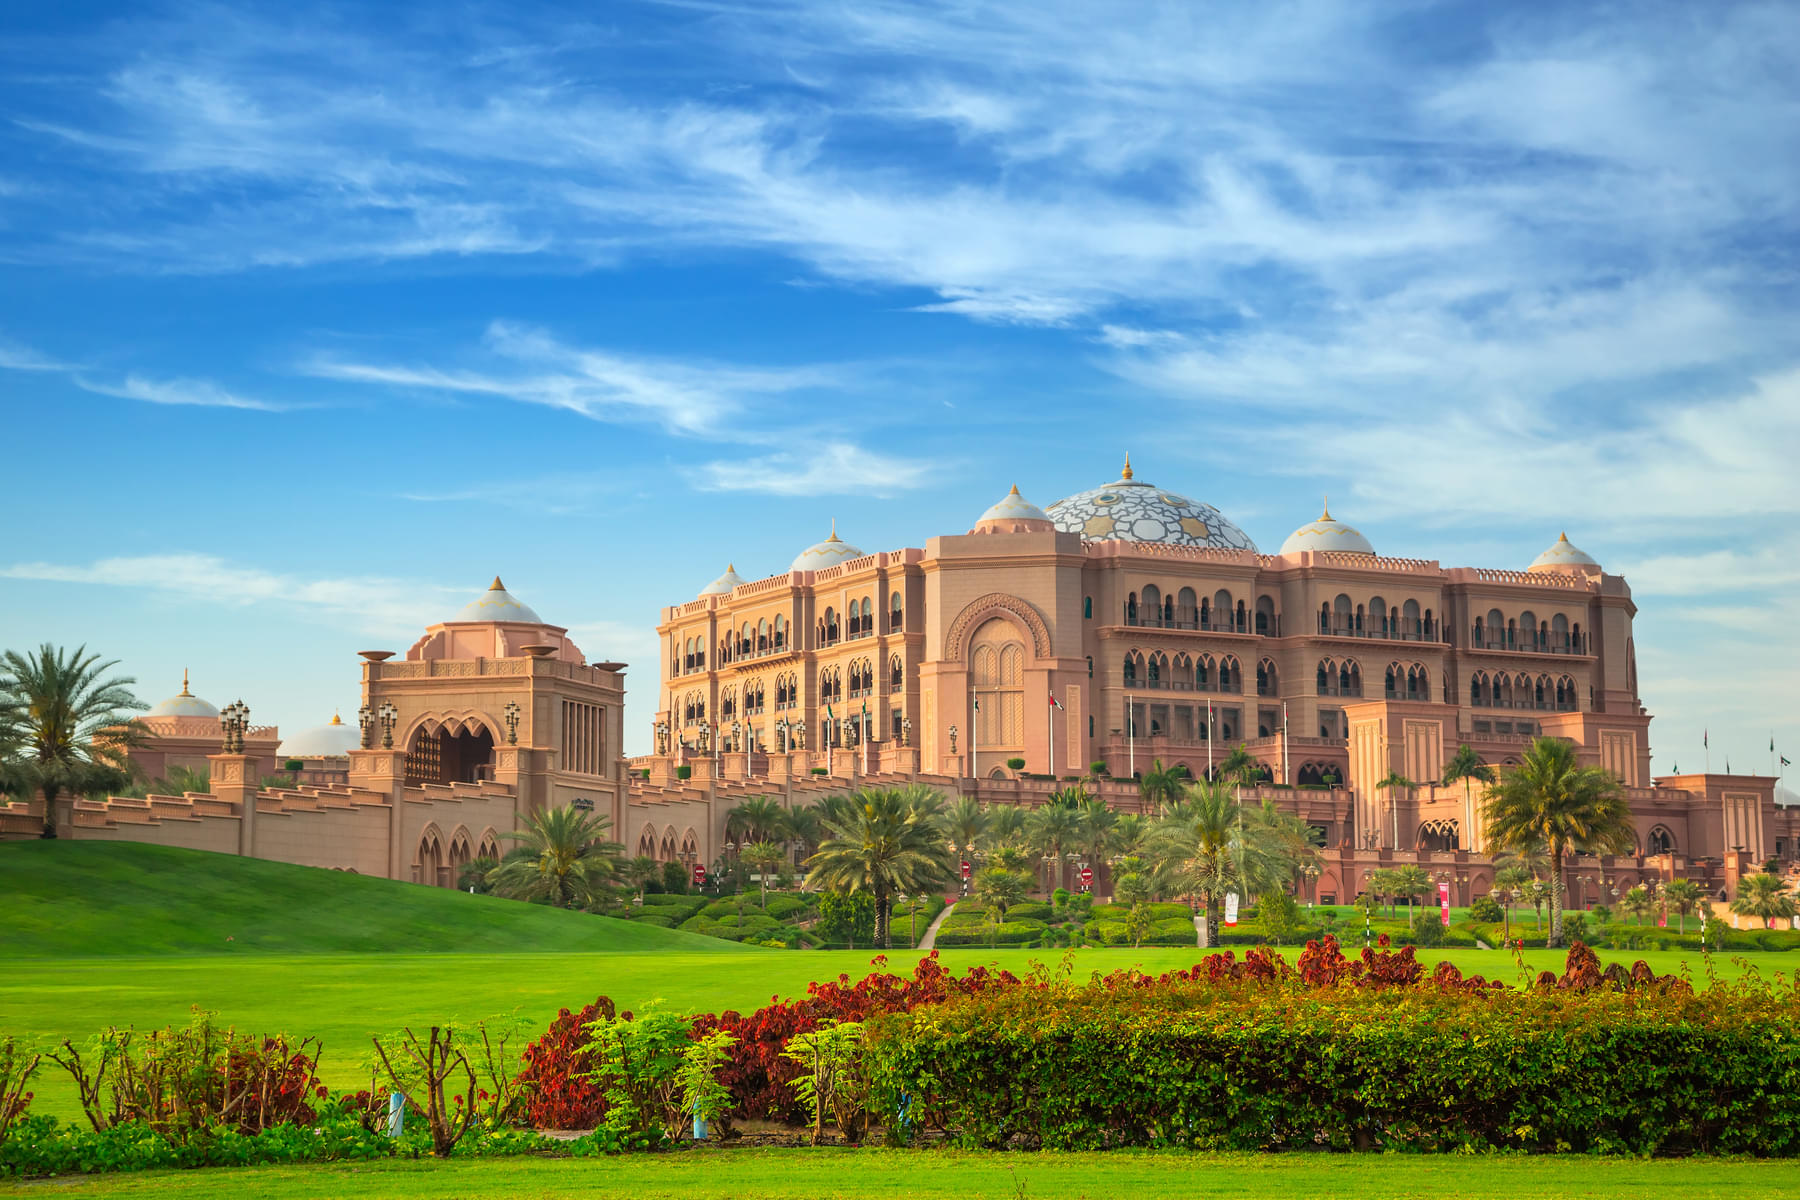 Marvel at the magnificent exterior of the Emirates Palace